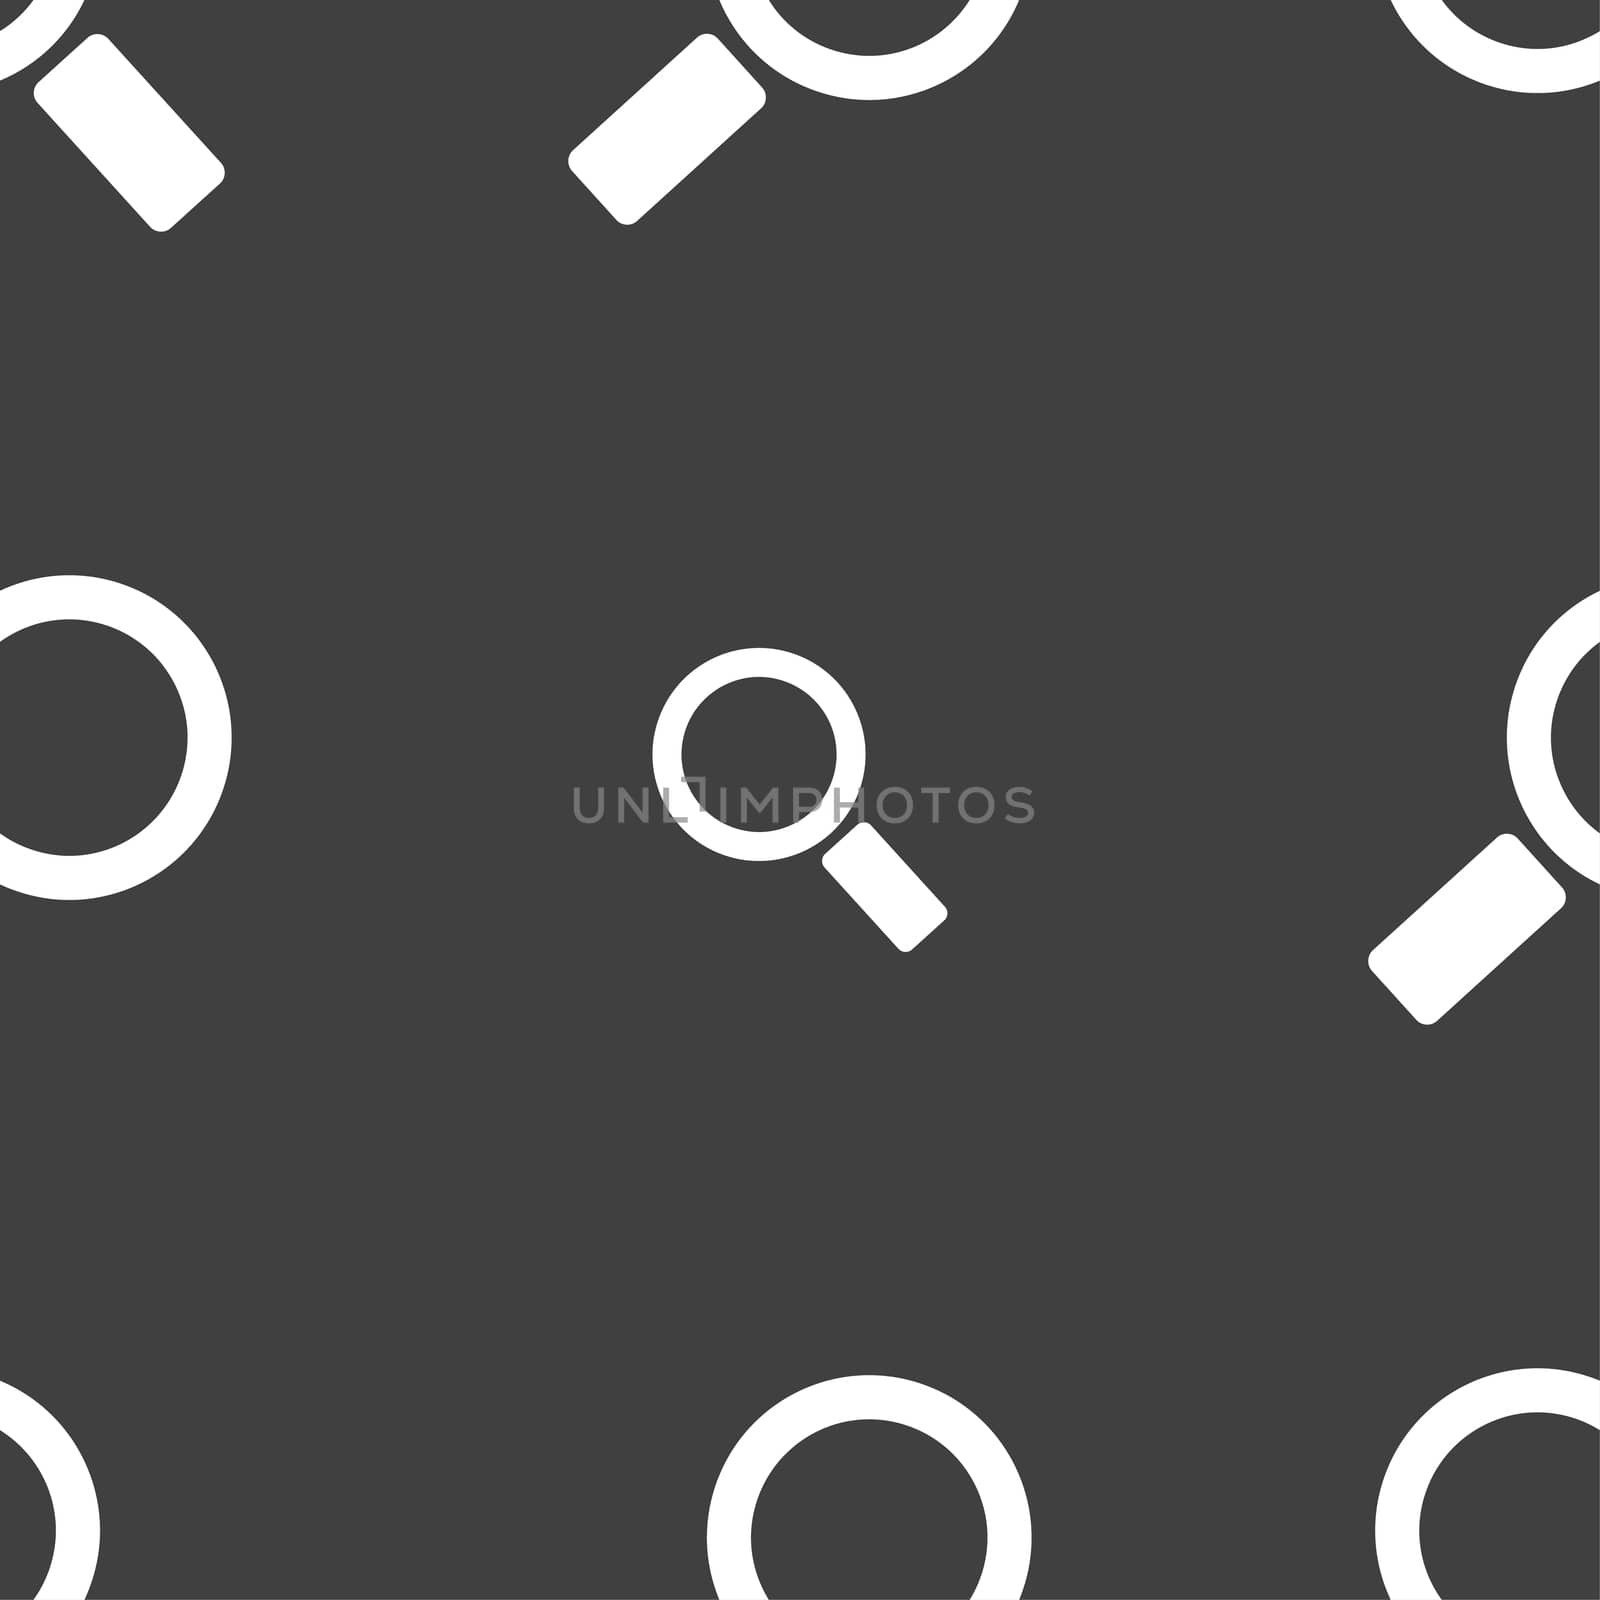 Magnifier glass sign icon. Zoom tool button. Navigation search symbol. Seamless pattern on a gray background. illustration